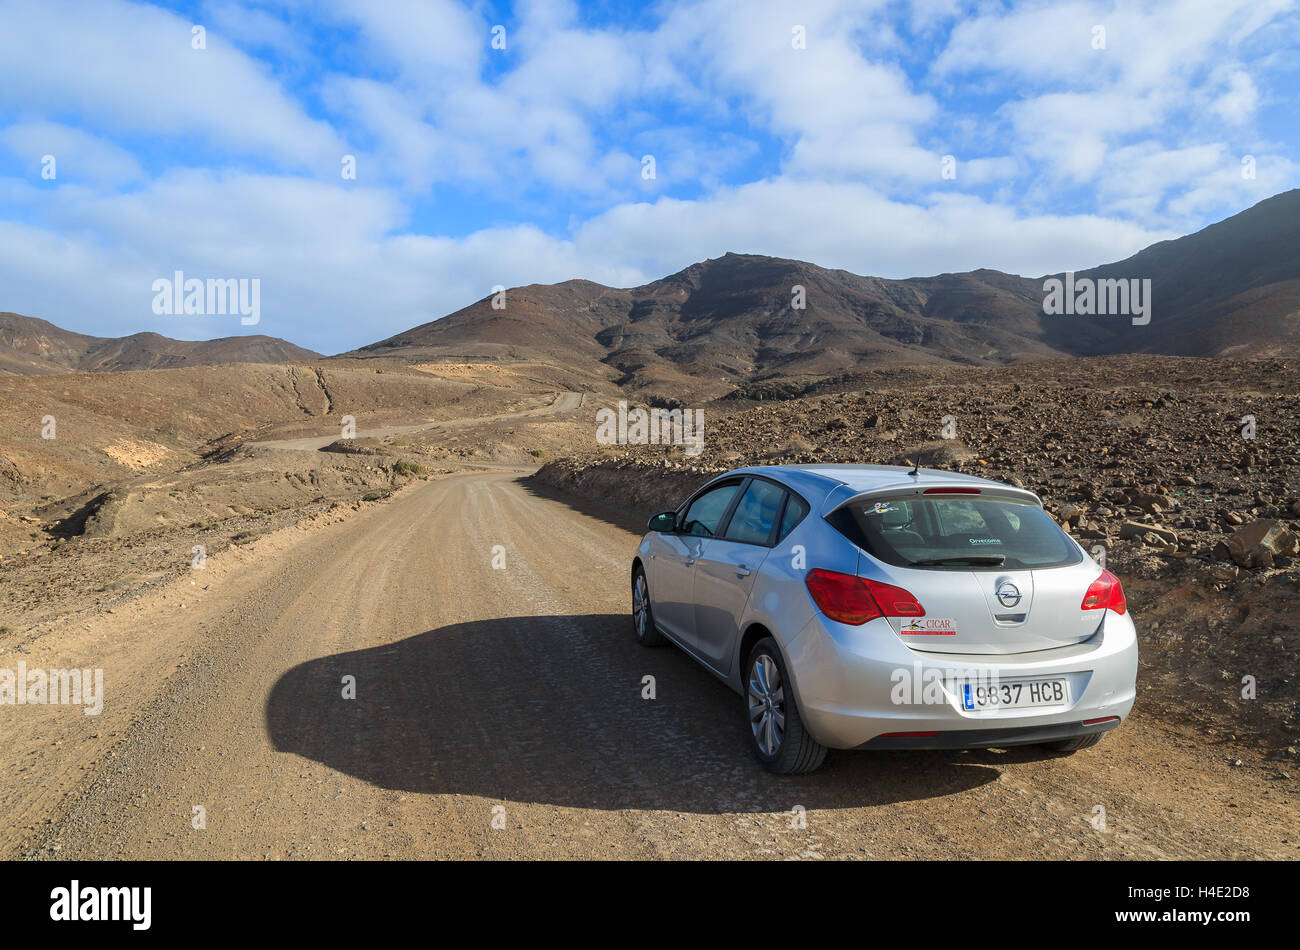 Hire car on unpaved road to Cofete beach and volcanic landscape near Morro Jable town, Fuerteventura, Canary Islands, Spain Stock Photo